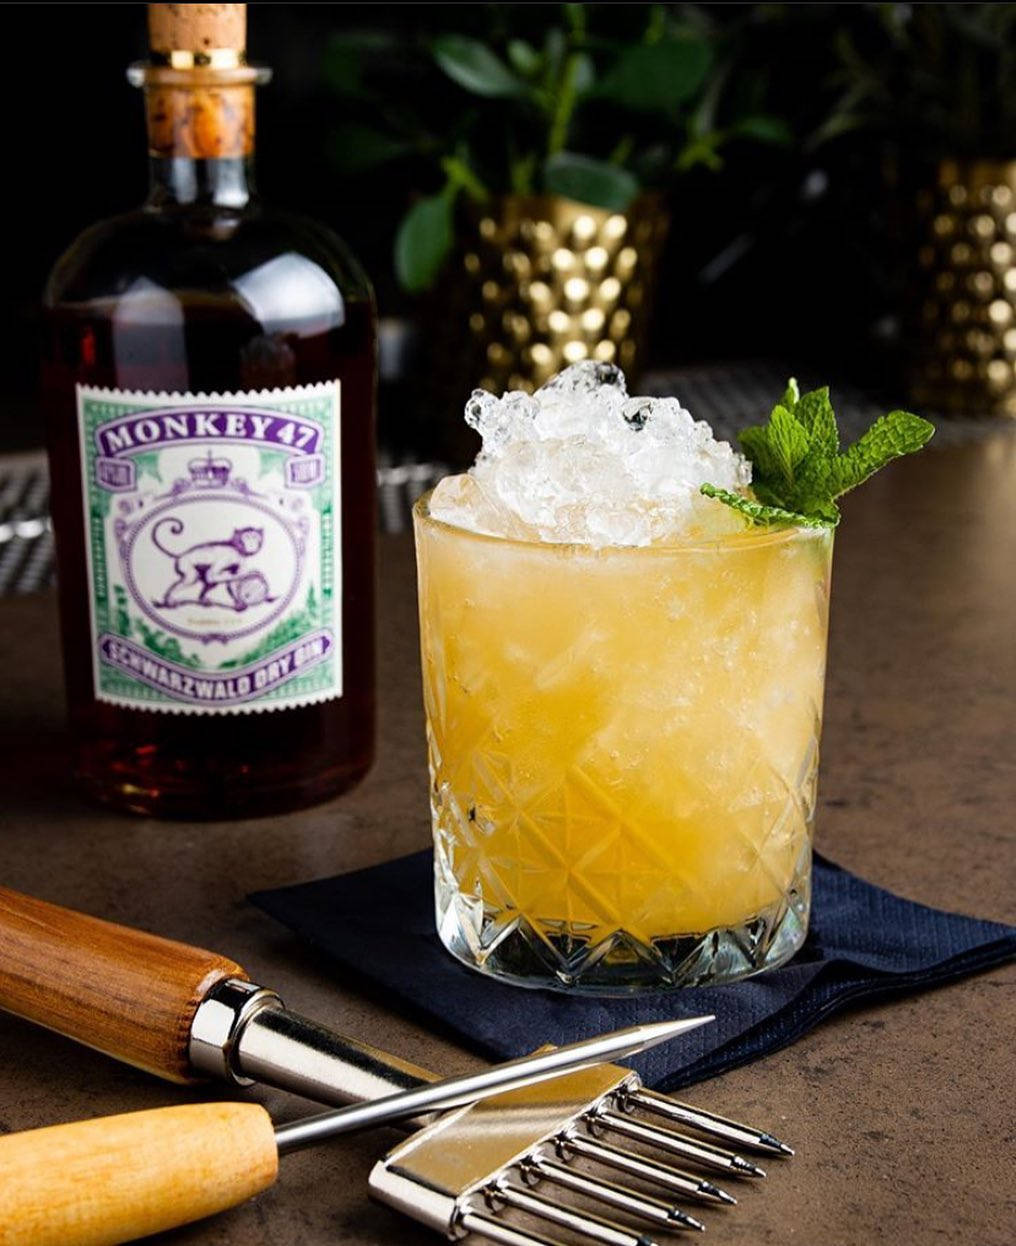 Caption: Indulge in a Dazzling Pineapple Cocktail with Monkey 47 Gin Wallpaper